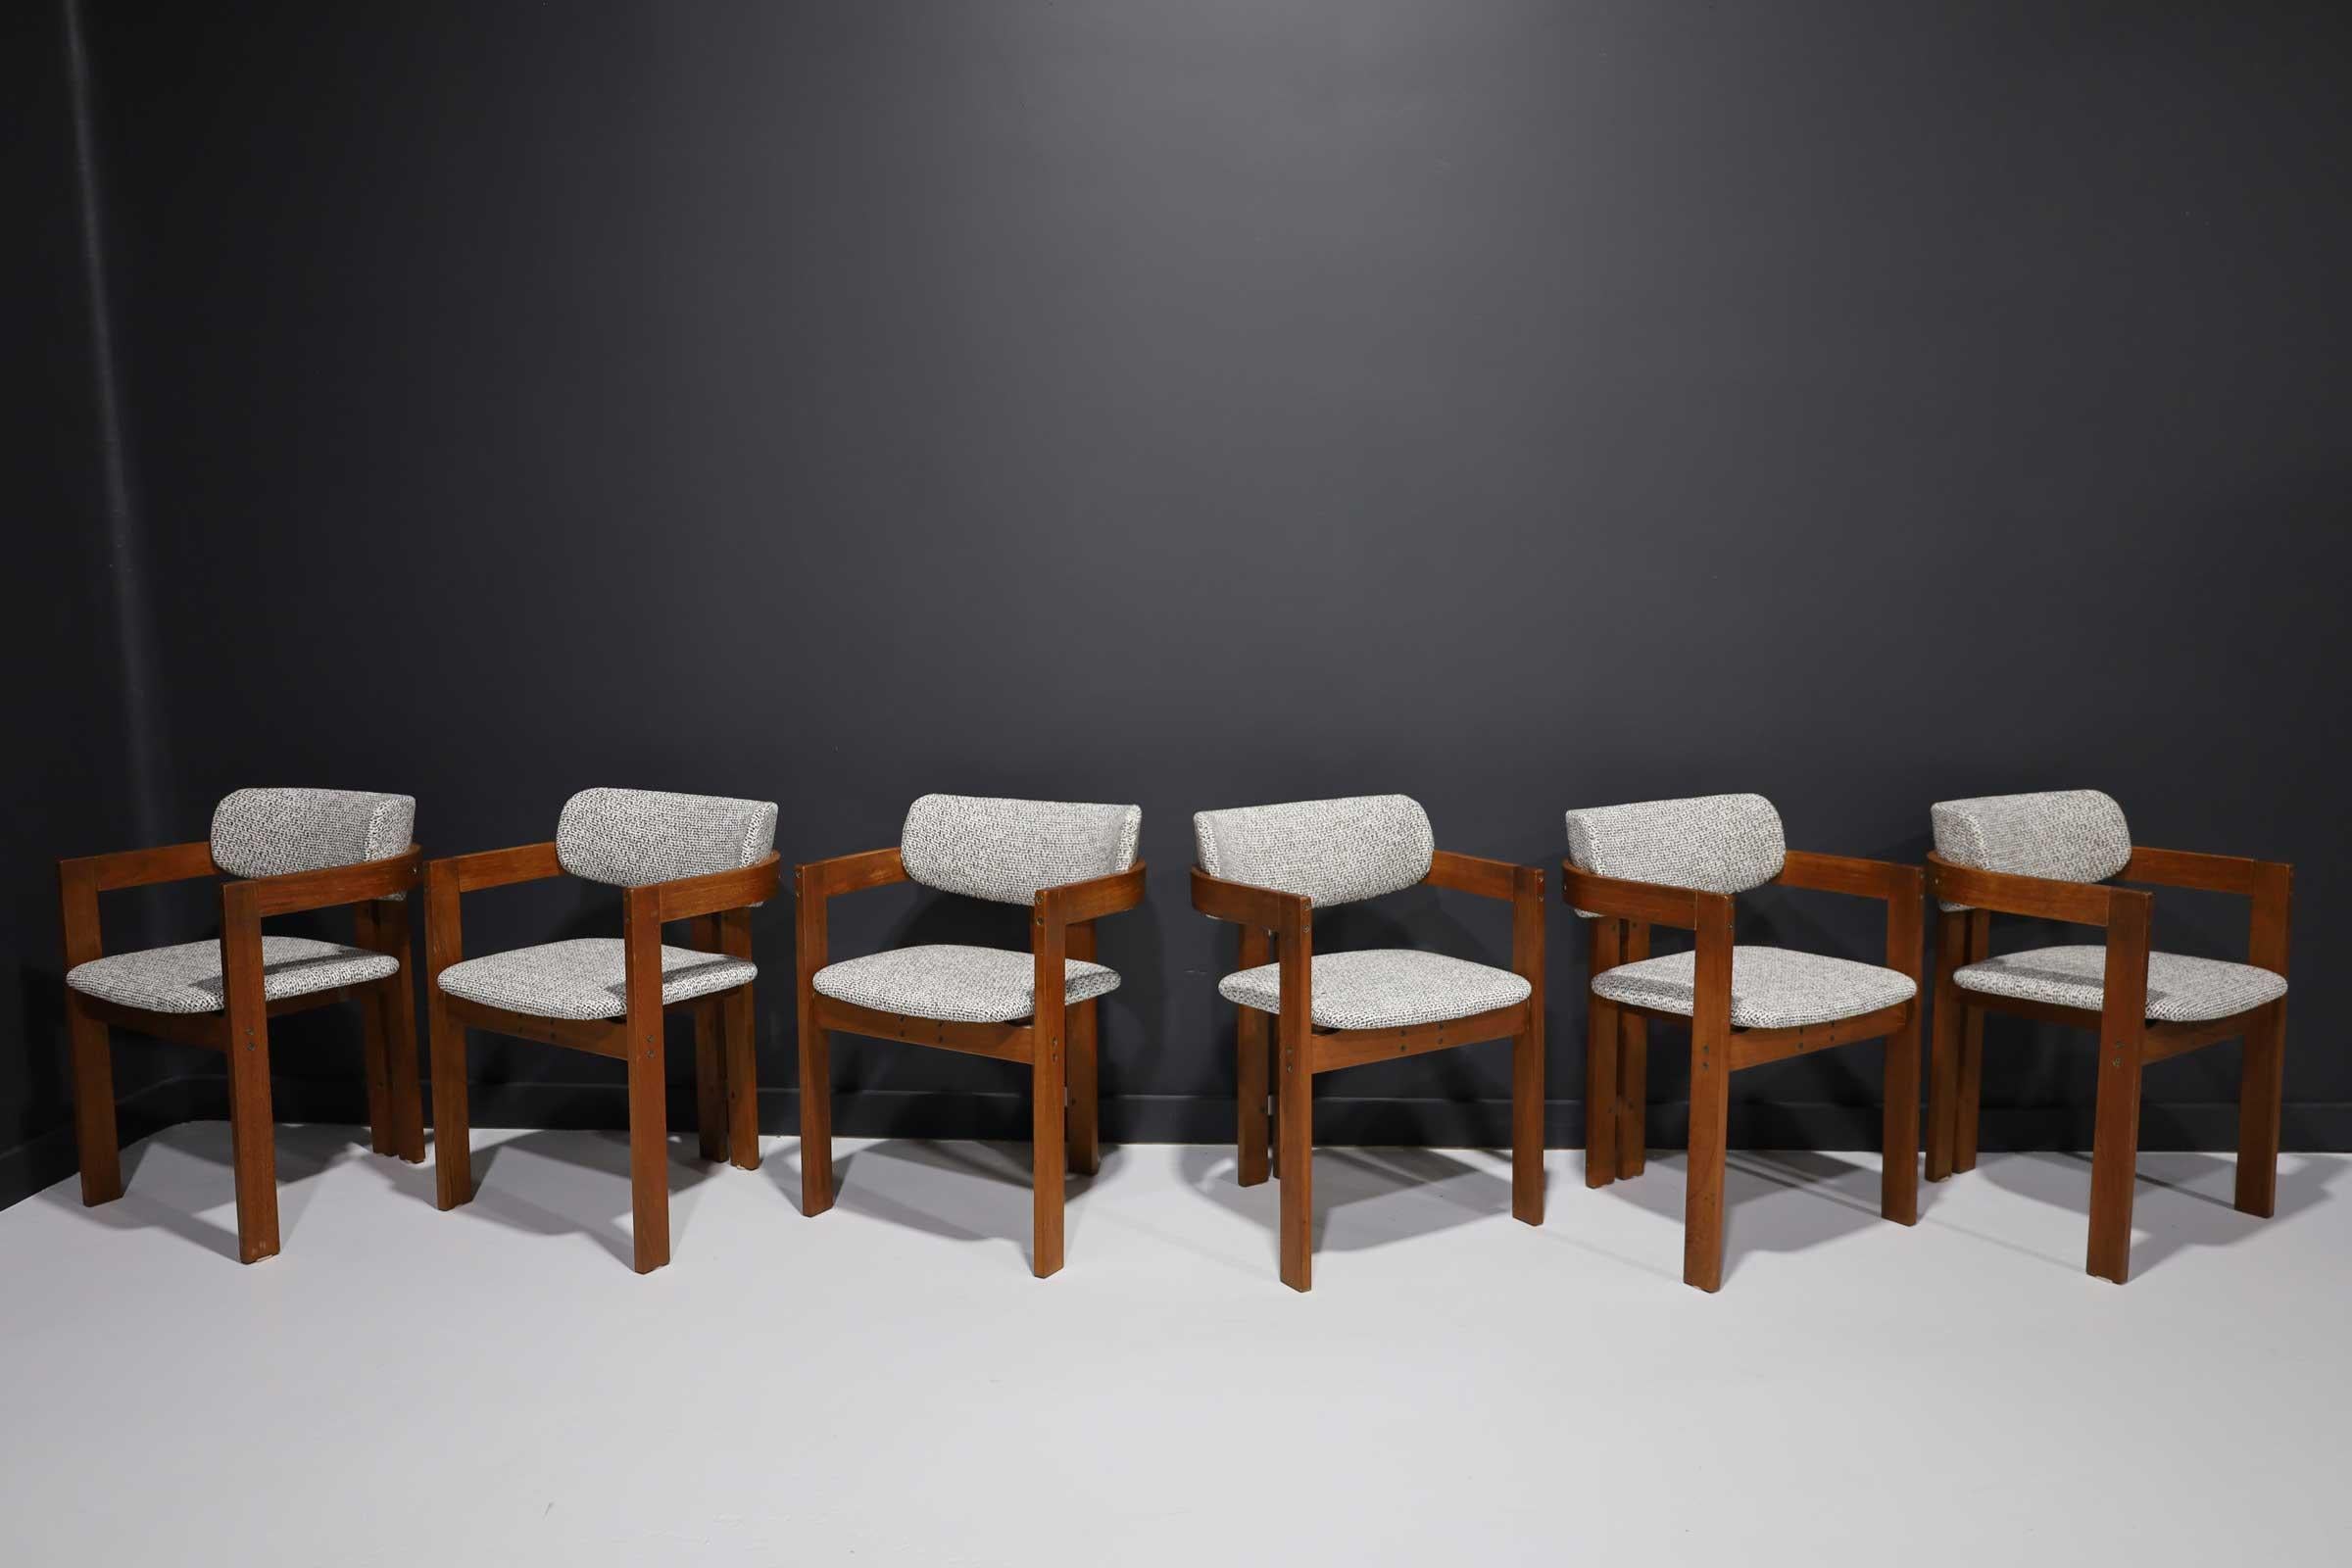 Newly upholstered in a woven texture with blacks, browns and whites. Six T-Back dining chairs in the style of Augusto Savini's 'Pamplona' dining chair and Afra & Tobia Scarpa's Pigreco T-Back chair.